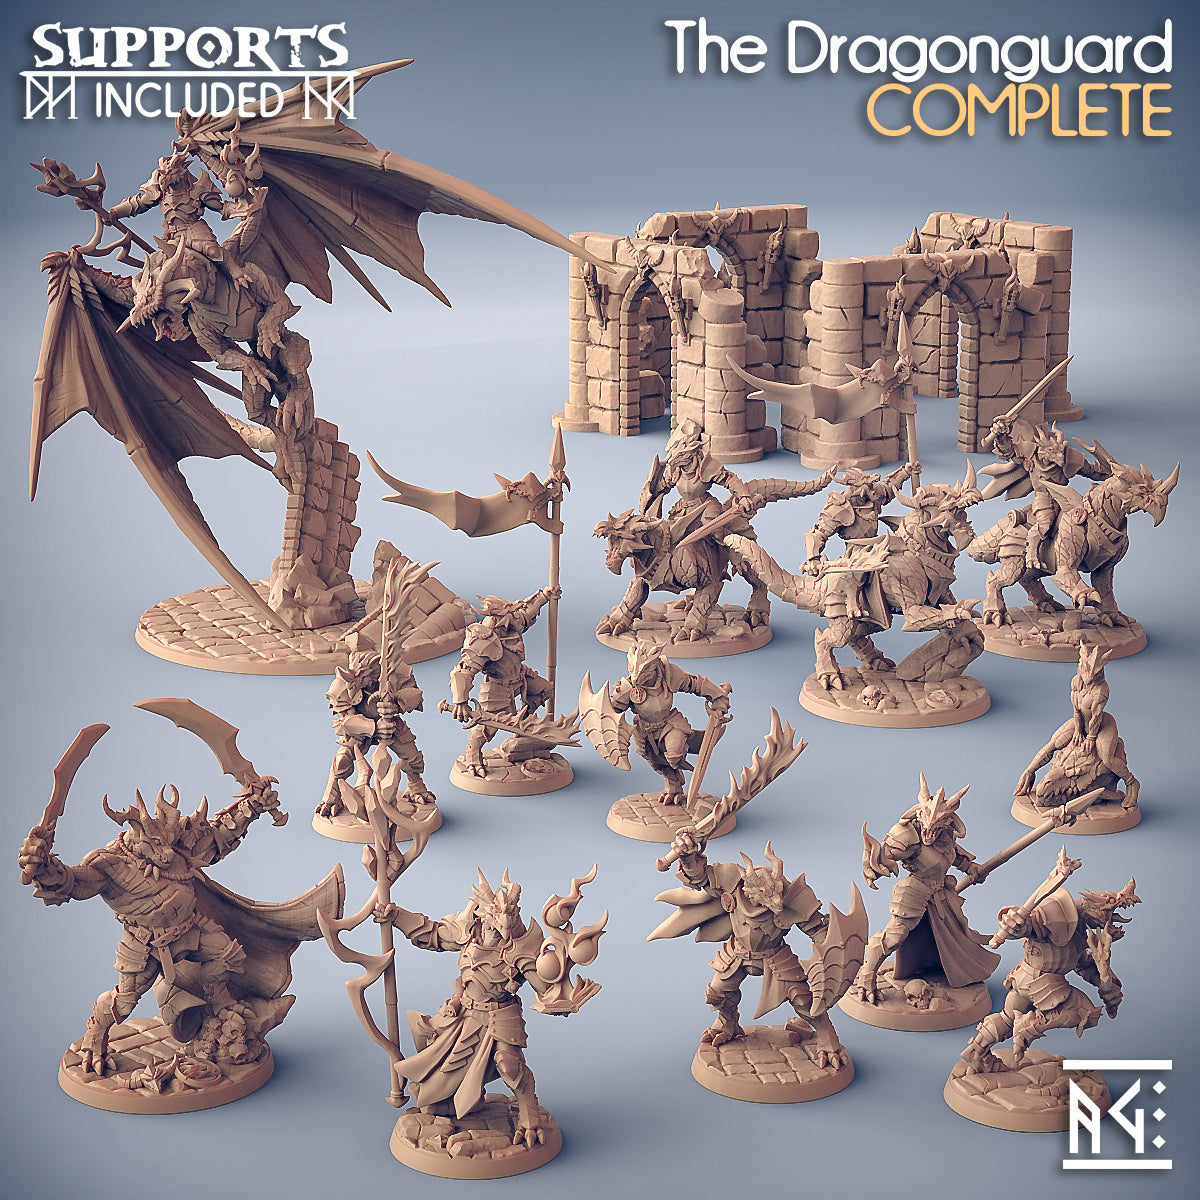 The Dragonguards